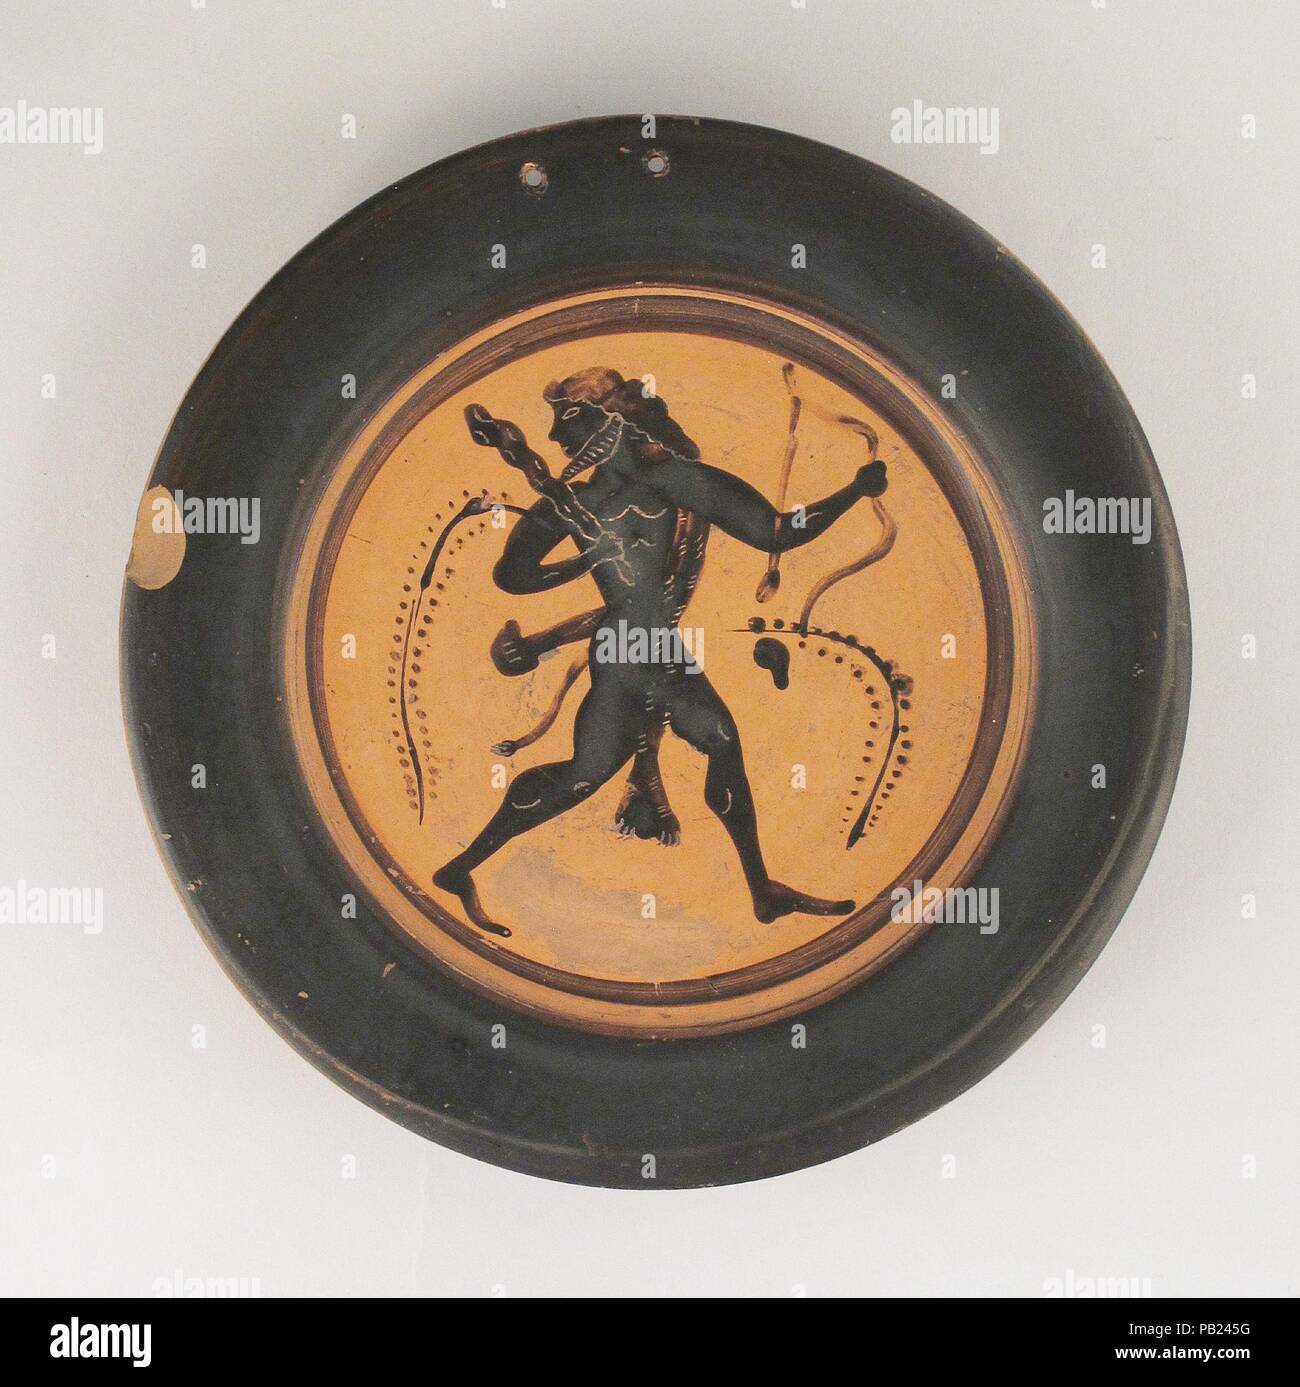 Plate. Culture: Greek, Attic. Dimensions: Overall: 13/16 in. (2.1 cm)  Other: 6 3/8in. (16.2cm). Date: ca. 500 B.C..  Herakles with bow, club, and sword. Museum: Metropolitan Museum of Art, New York, USA. Stock Photo